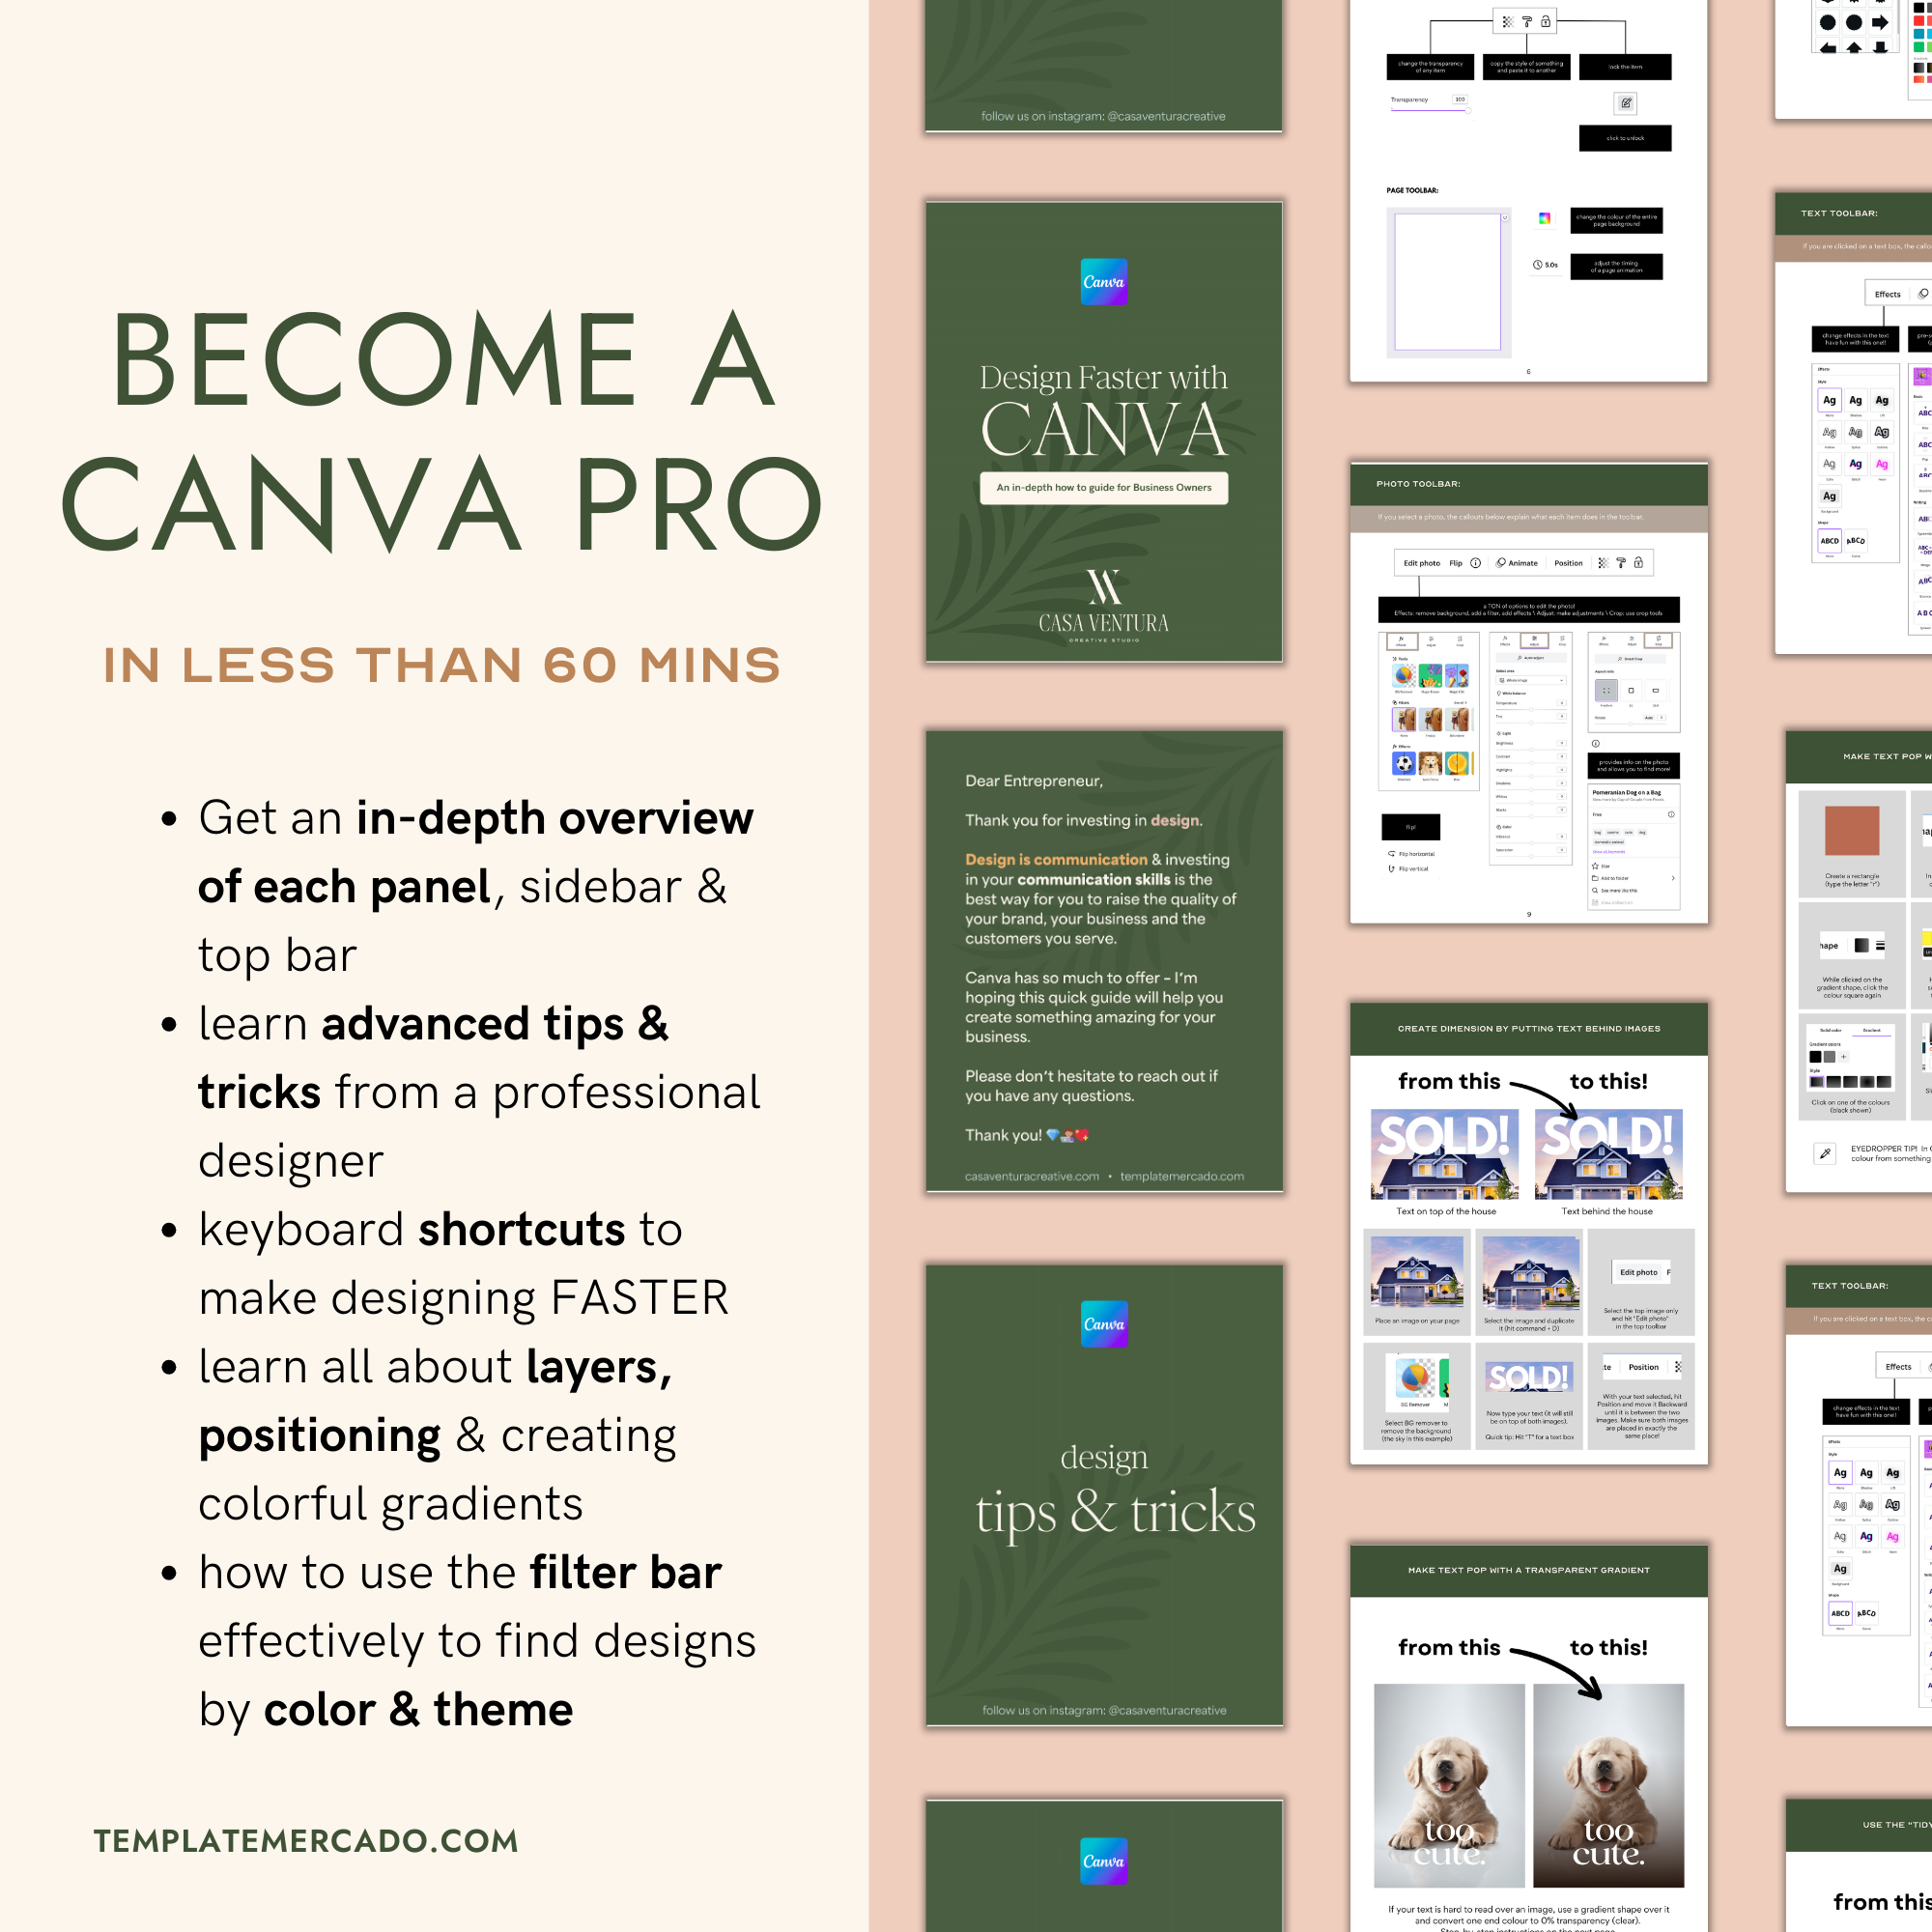 Design Faster With Our Canva Guide – Canva How To Guide for Business Owners - templatemercado